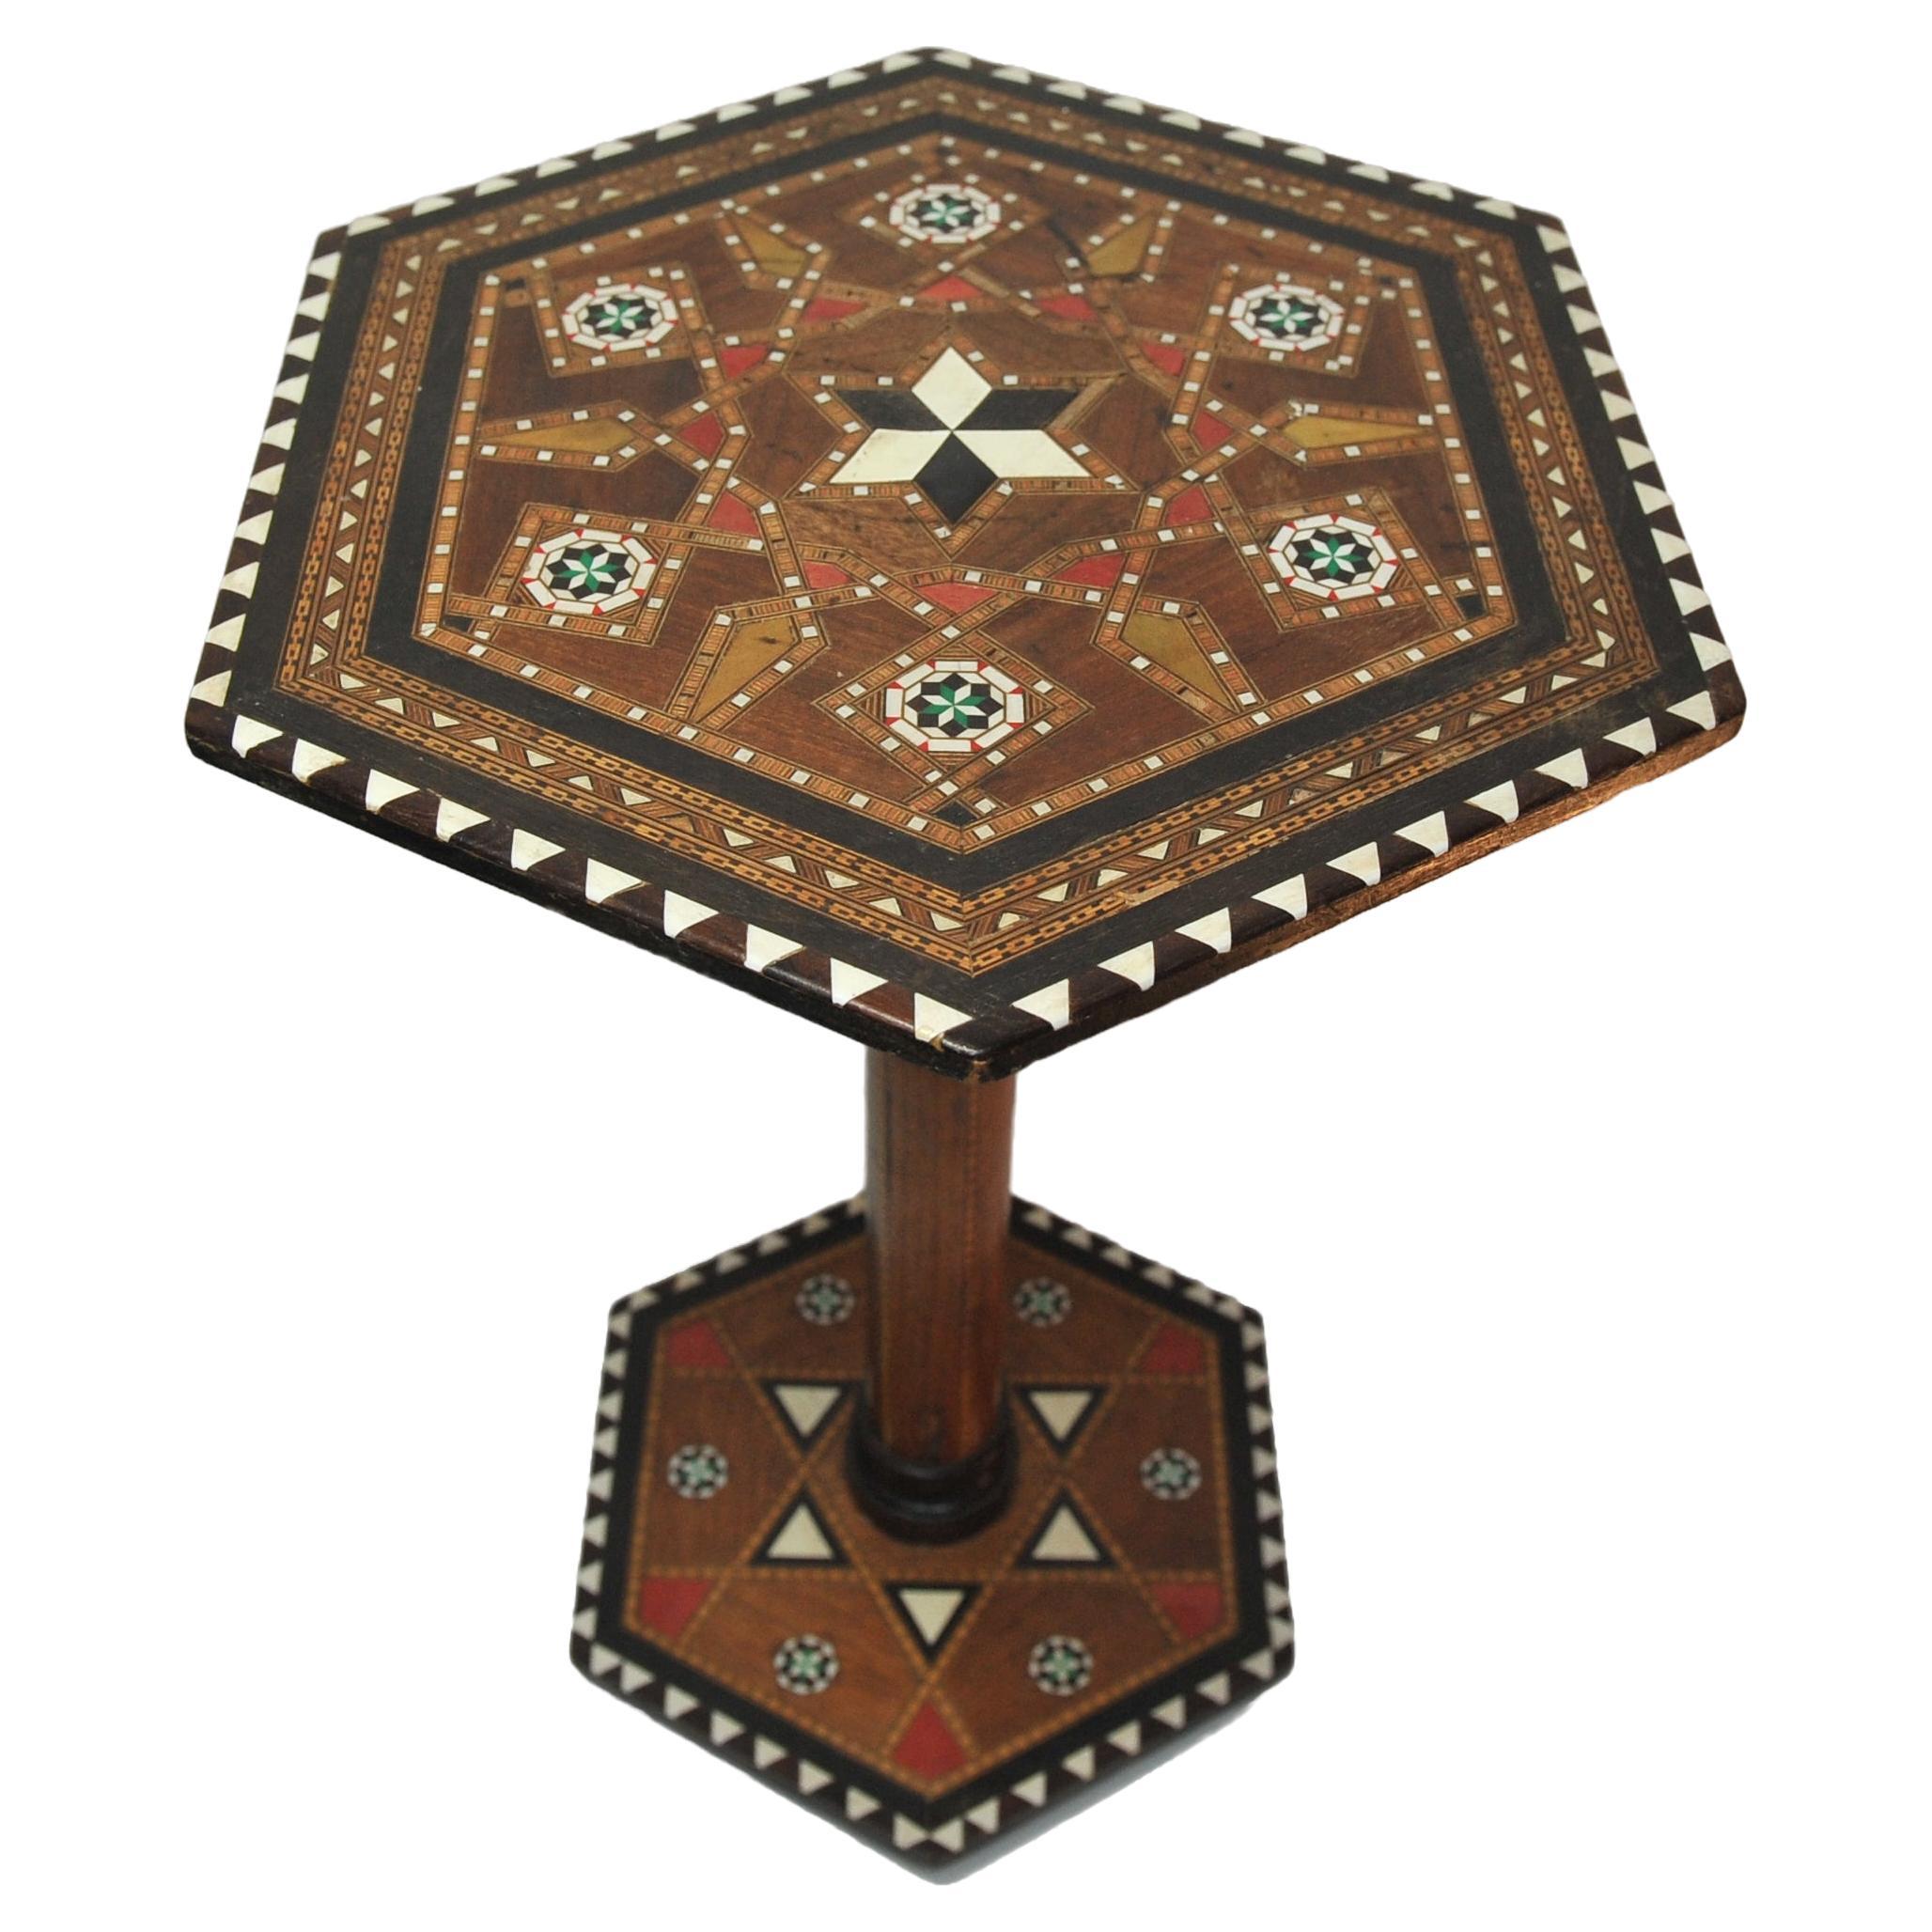 Parquetry A 19th Century Hexagonal Damascene Fruitwood Tea Table With Mosaic Detailing  For Sale